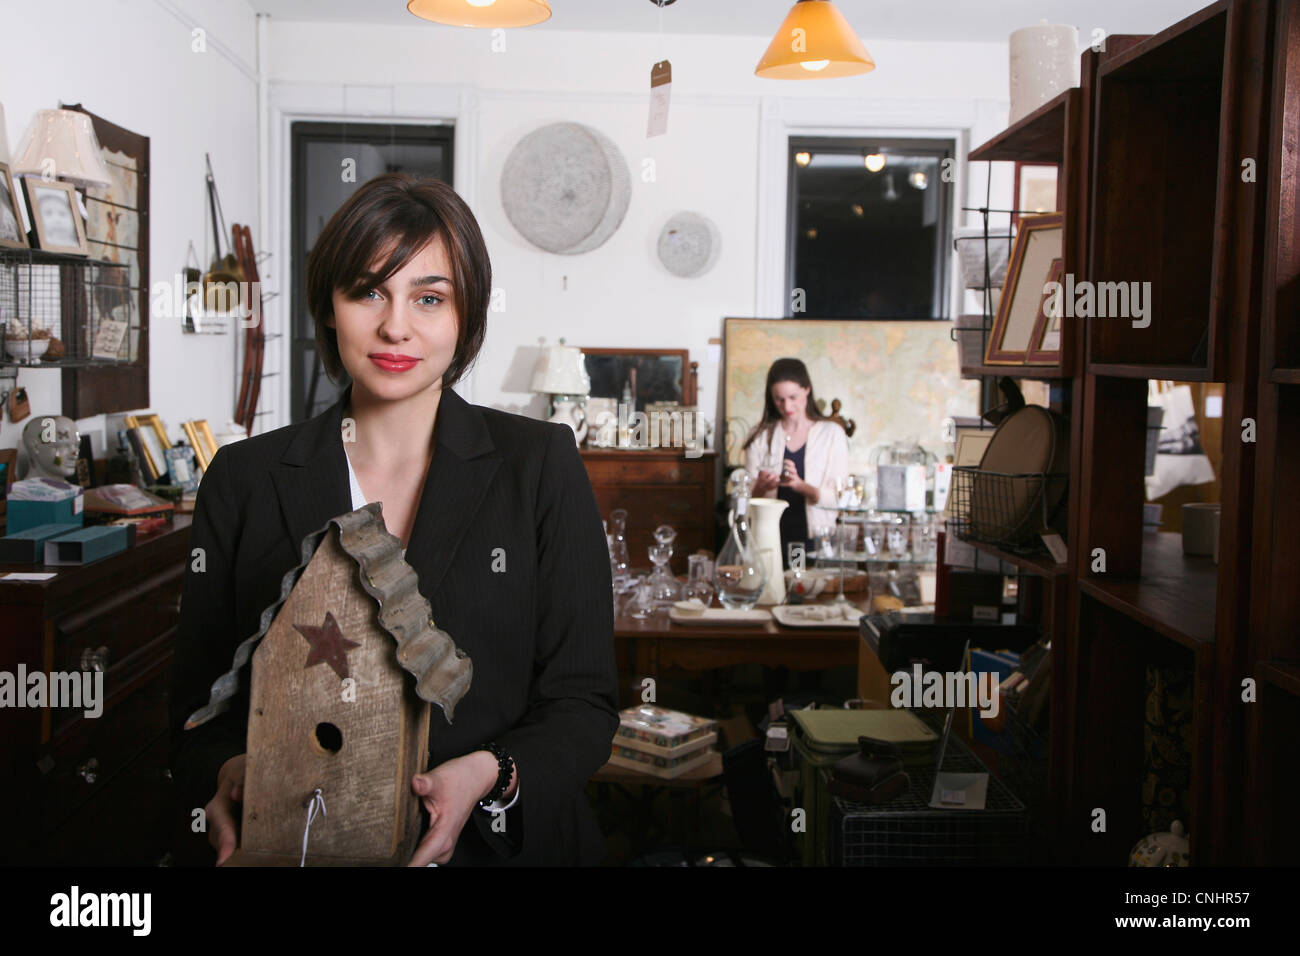 A woman holding an old birdhouse in an antiques shop Stock Photo